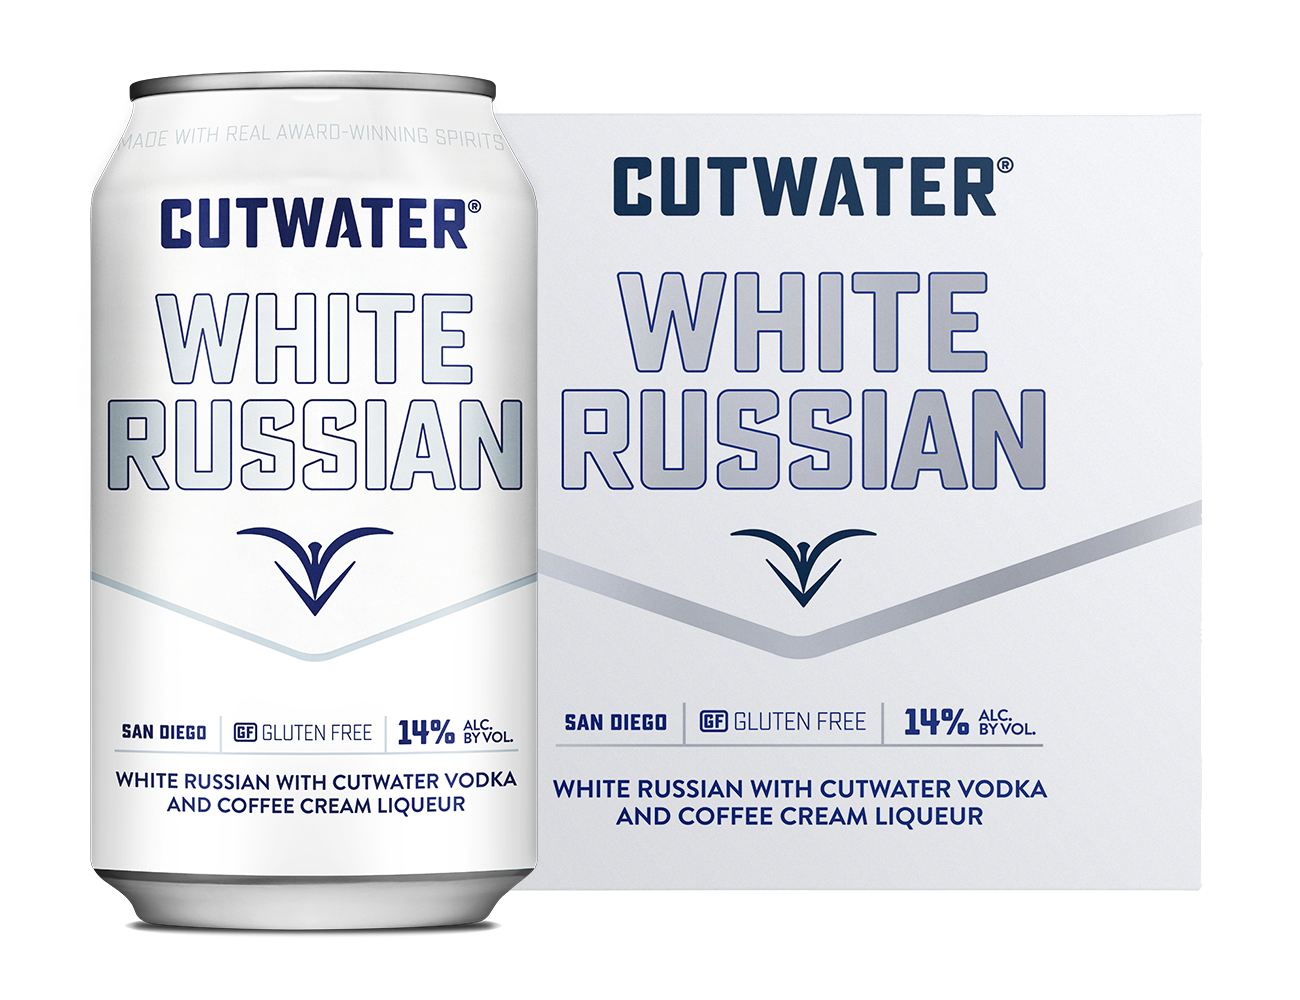 CUTWATER WHITE RUSSIAN